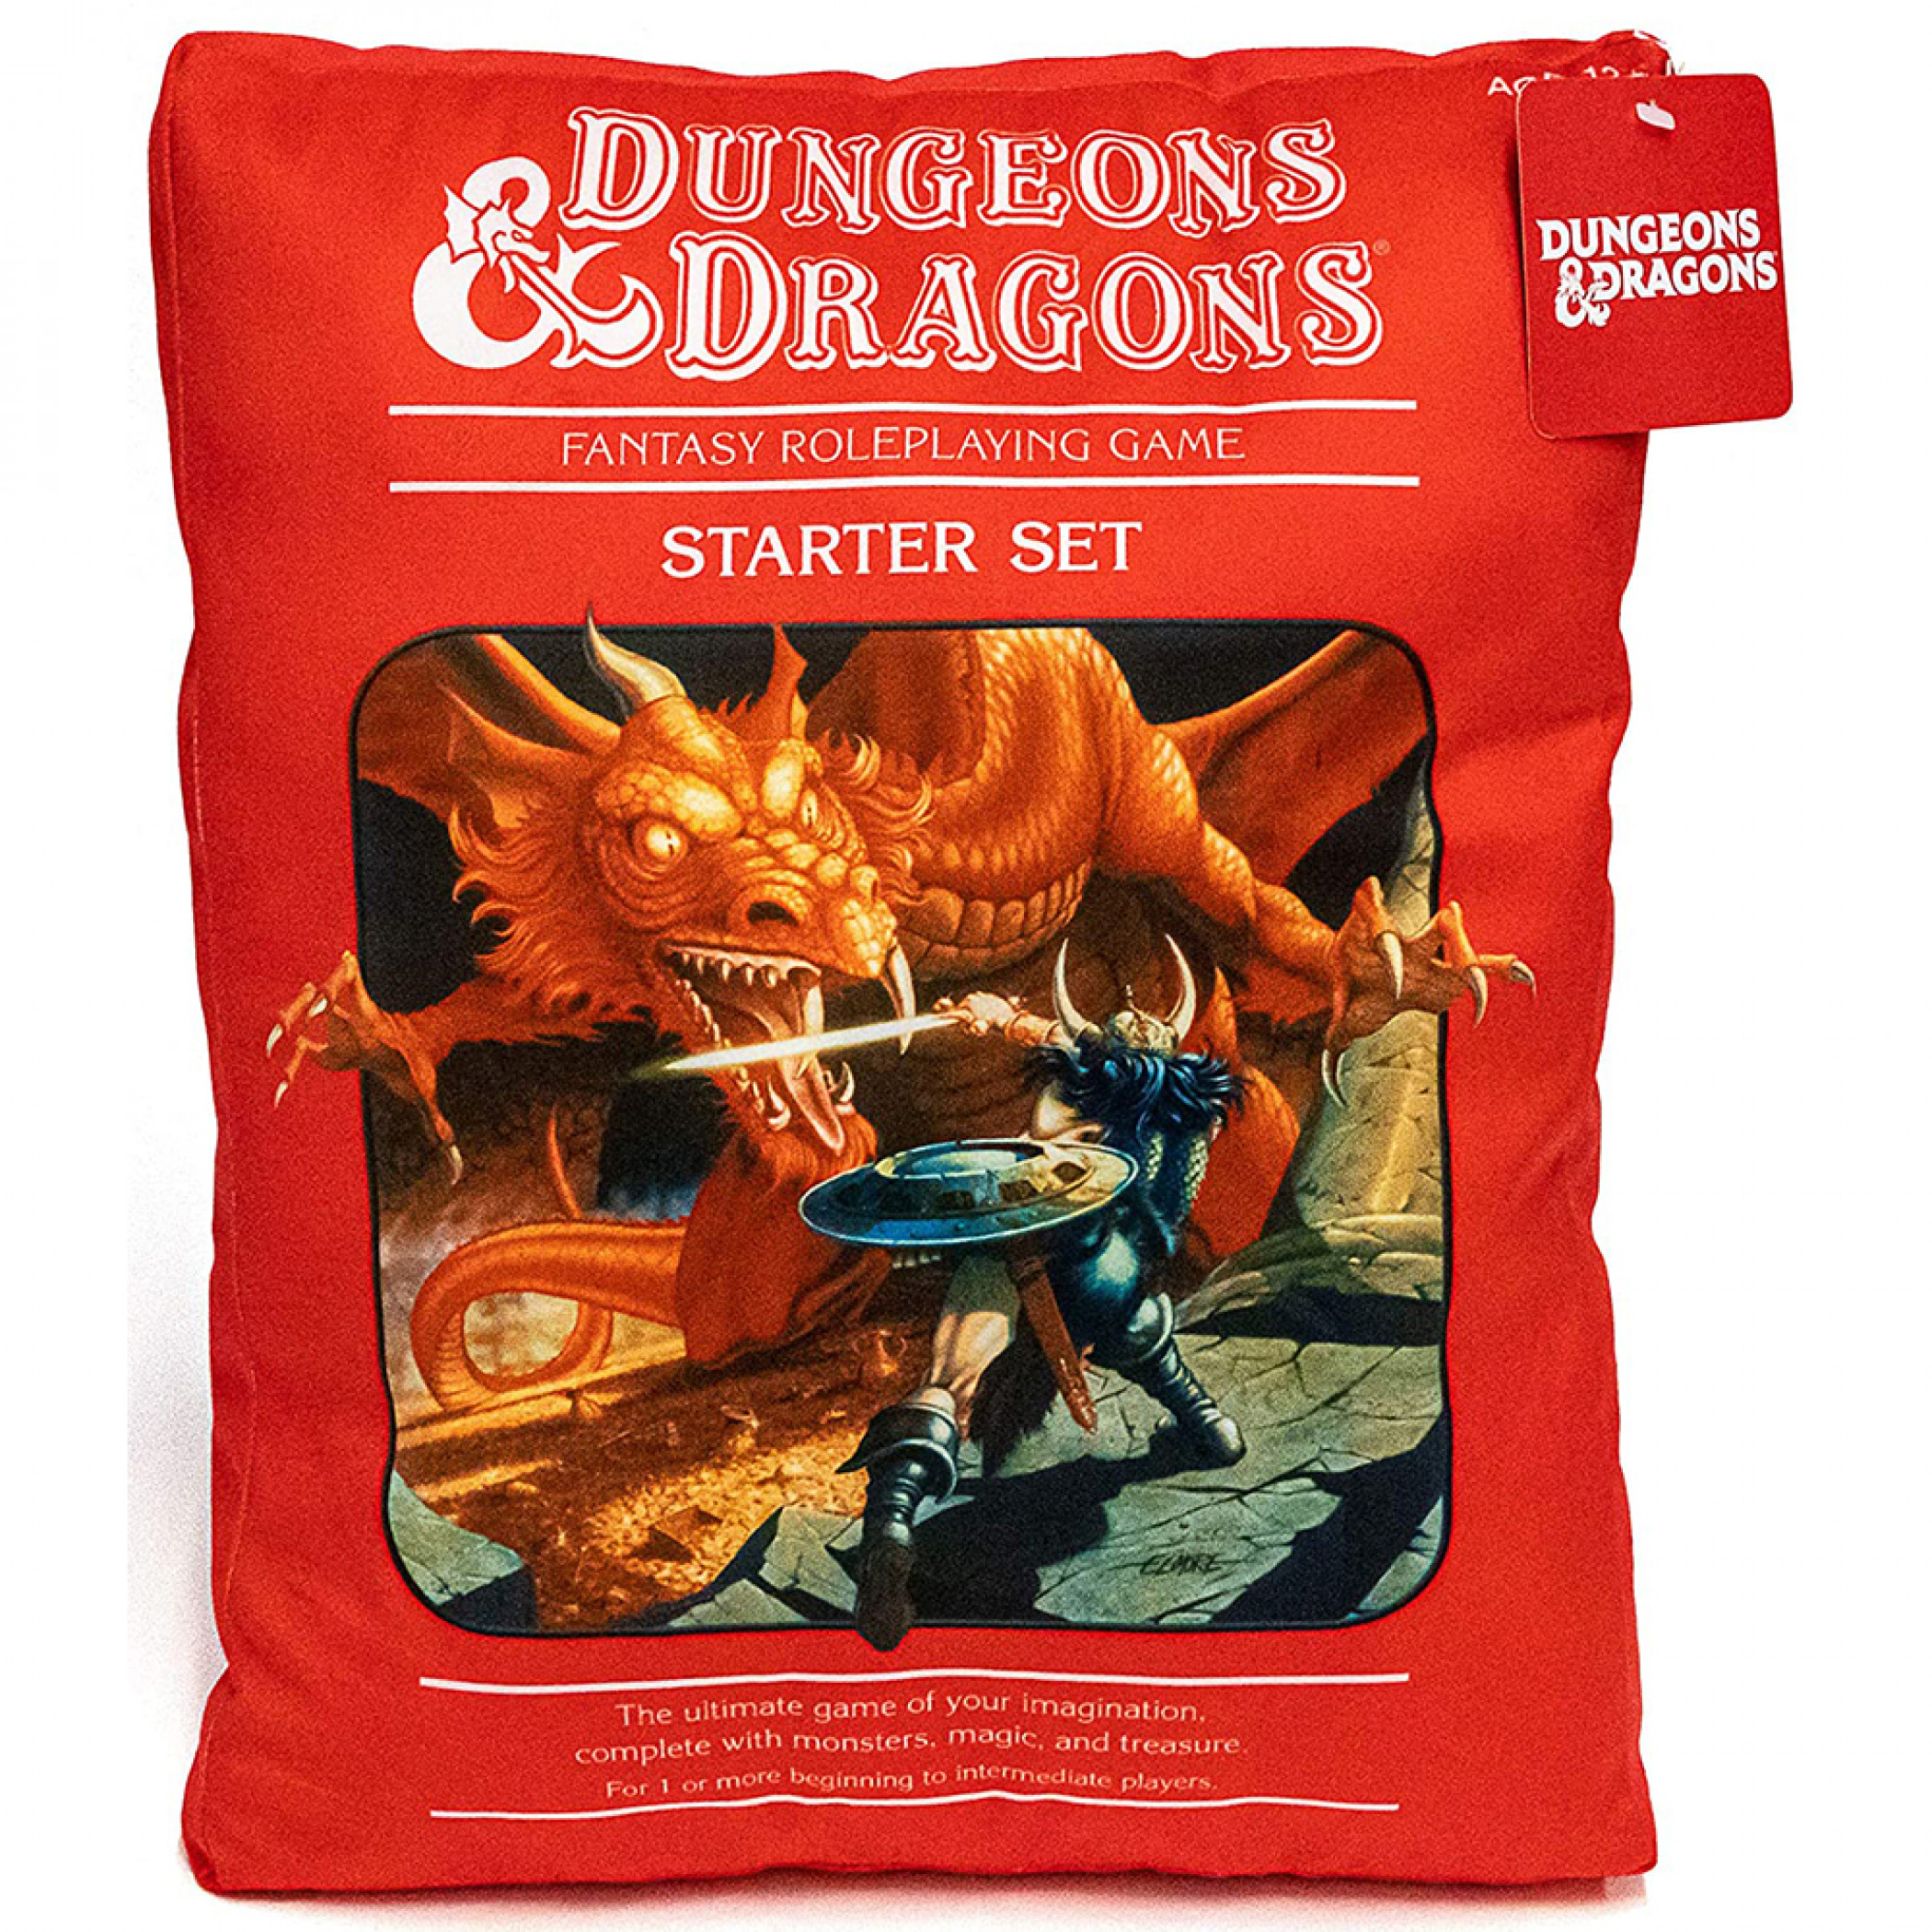 Dungeons & Dragons Red Box Shaped Pillow